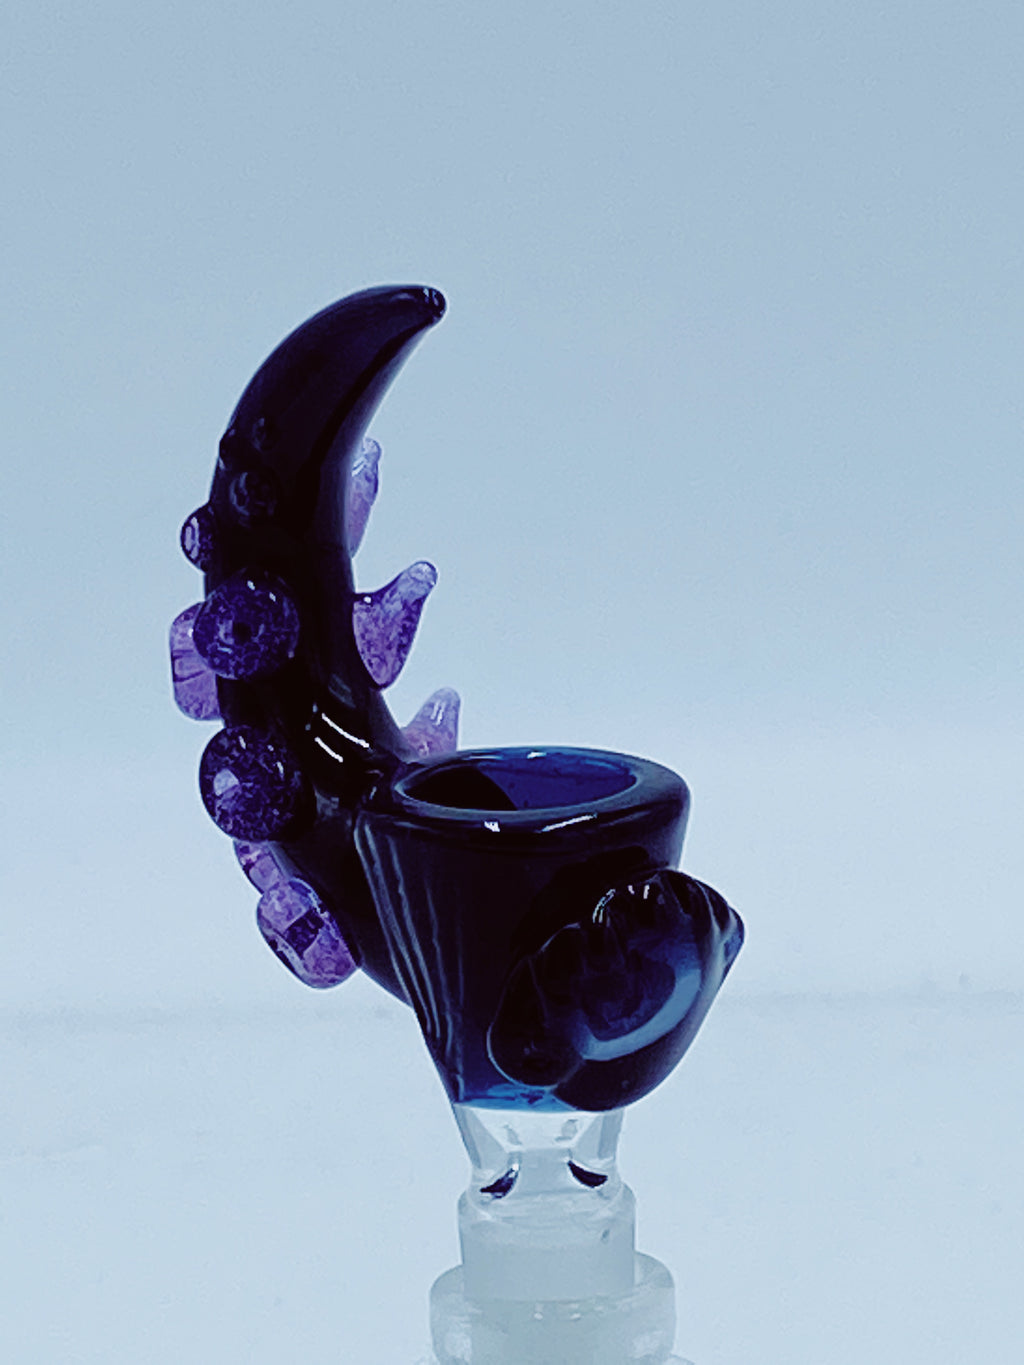 Tear E 14 mm Monster Bowl  Type 7 - Smoke Country - Land of the artistic glass blown bongs